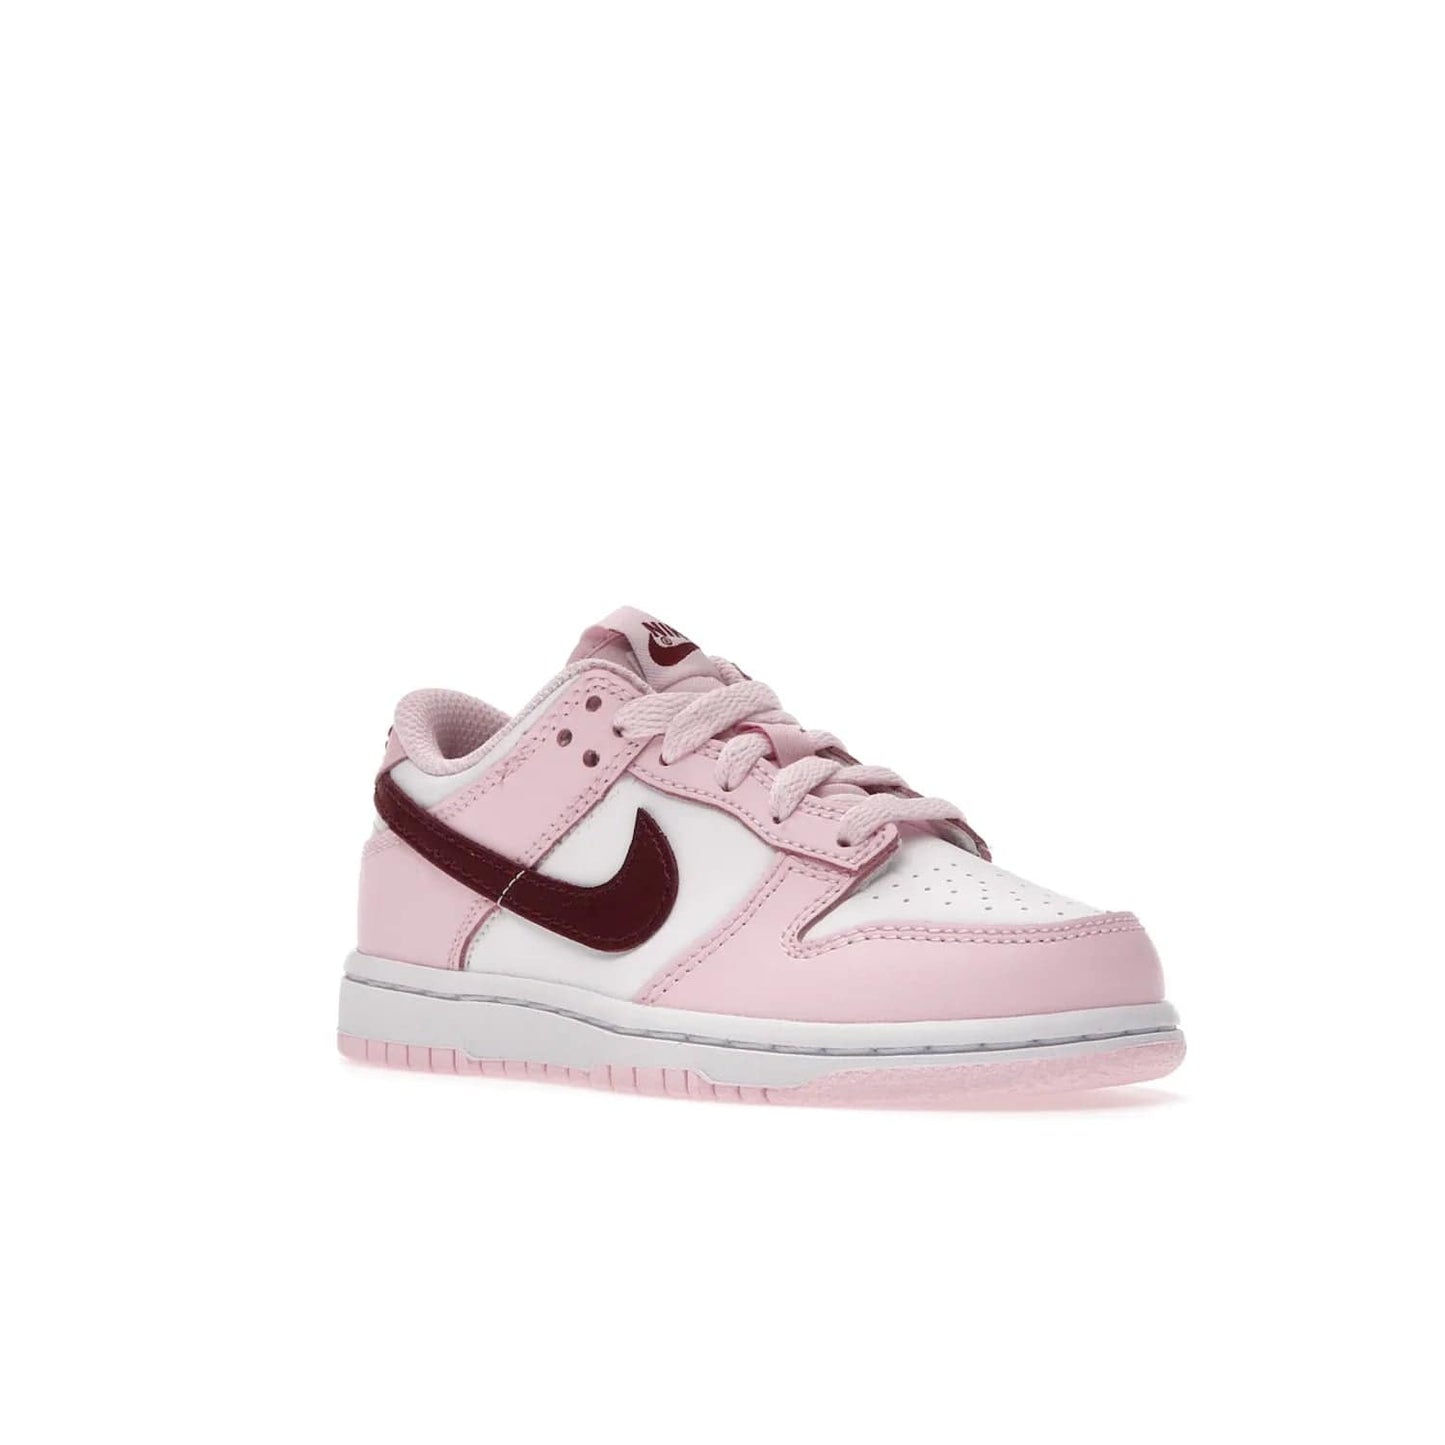 Nike Dunk Low Pink Red White (PS) - Image 5 - Only at www.BallersClubKickz.com - Introducing the Nike Dunk Low Pink Red White (PS), the perfect addition to your sneaker collection. A classic silhouette with modern vibrant colors, including a pink upper with red and white accents and a white midsole. Comfort and durability, perfect for any outfit. Limited edition, available June 22nd.